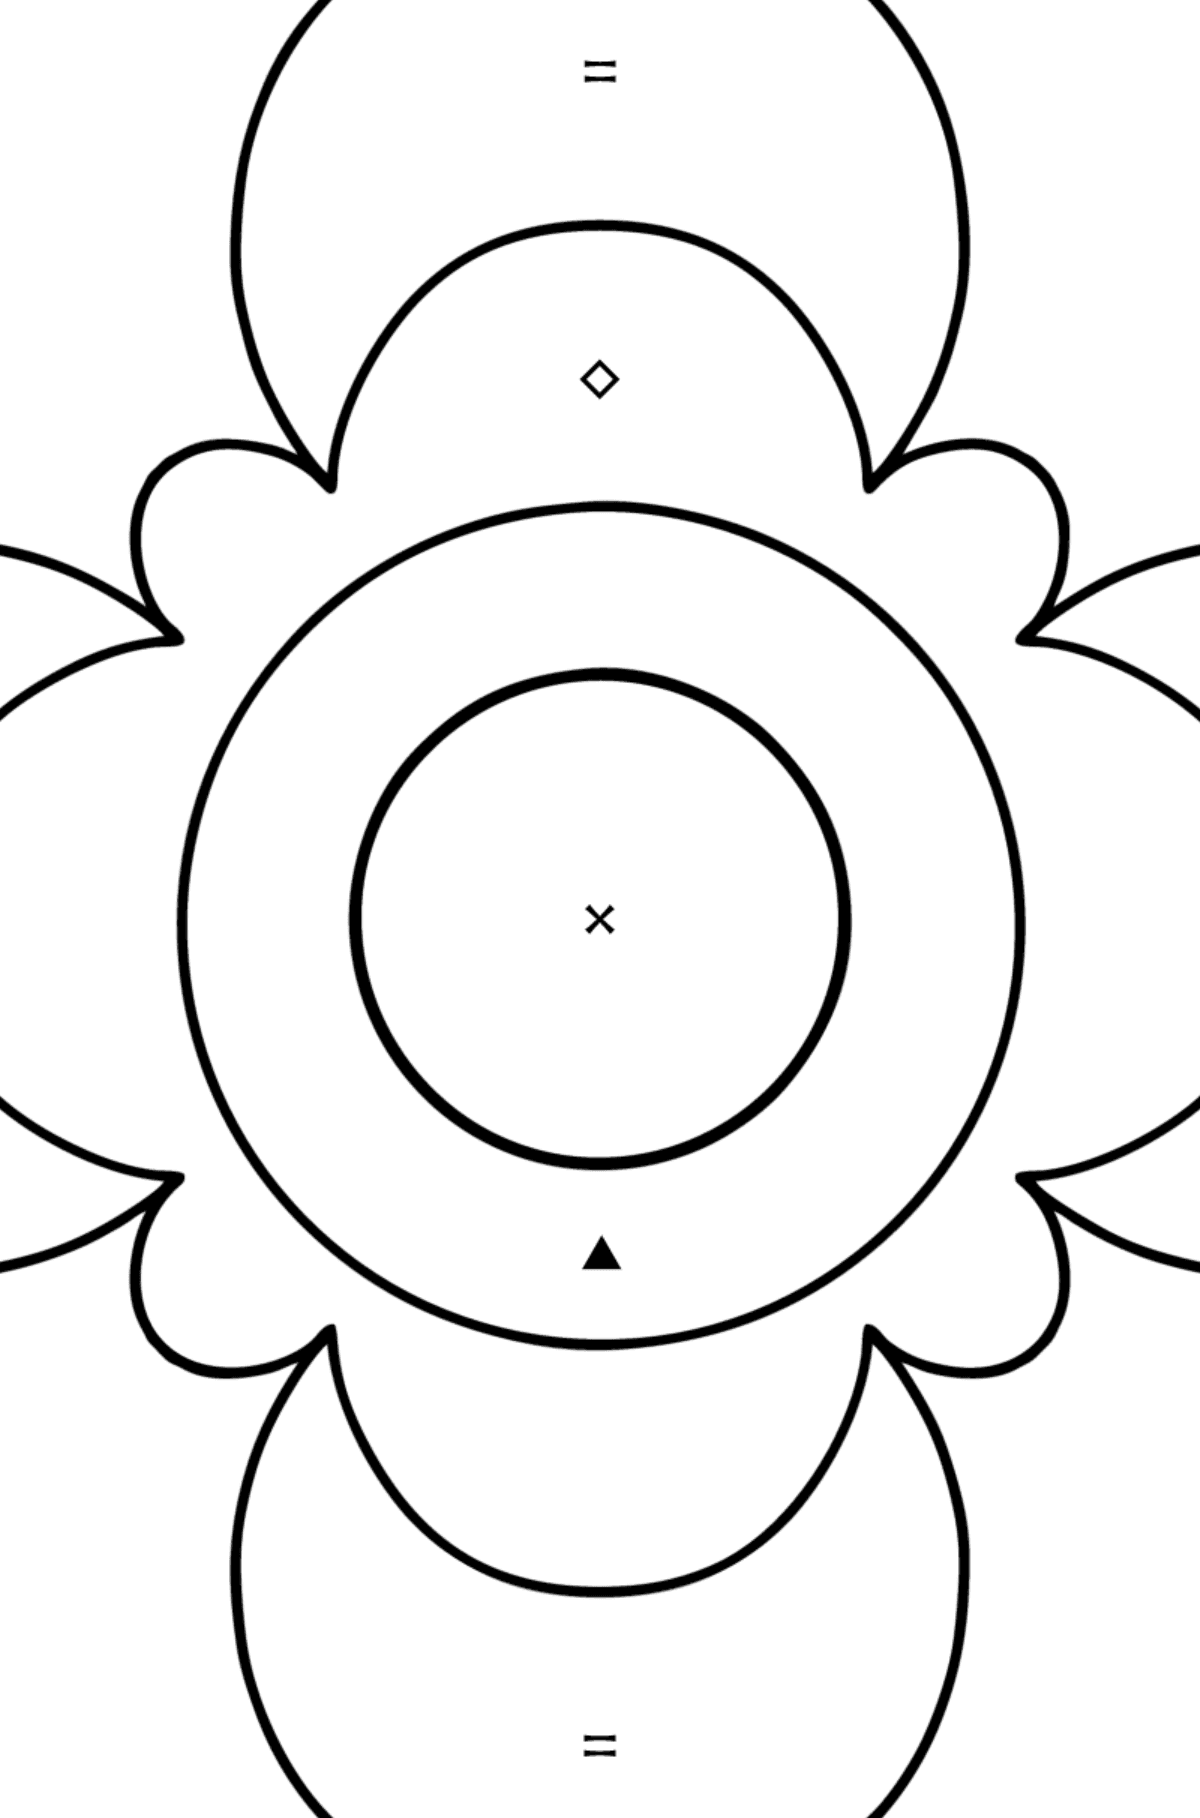 Coloring Anti stress flower for kids - Coloring by Symbols for Kids